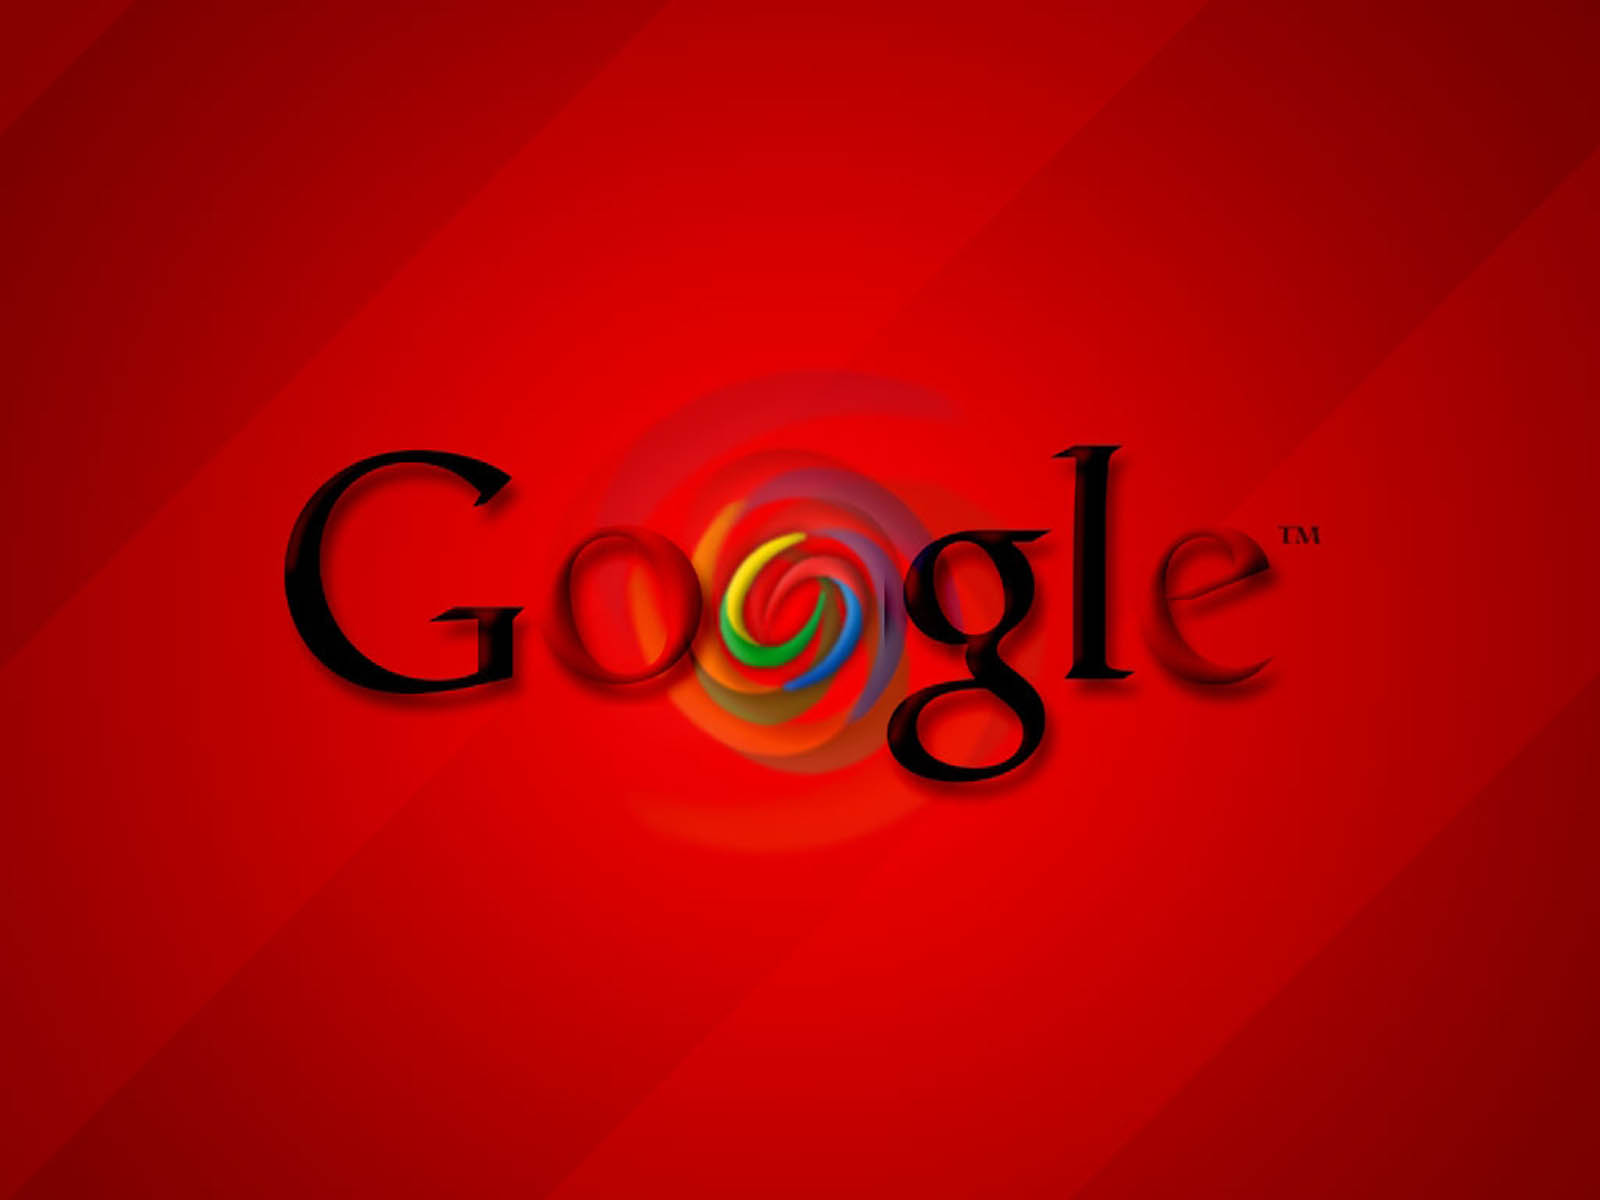 Google Wallpaper And Background Pictures Gallery